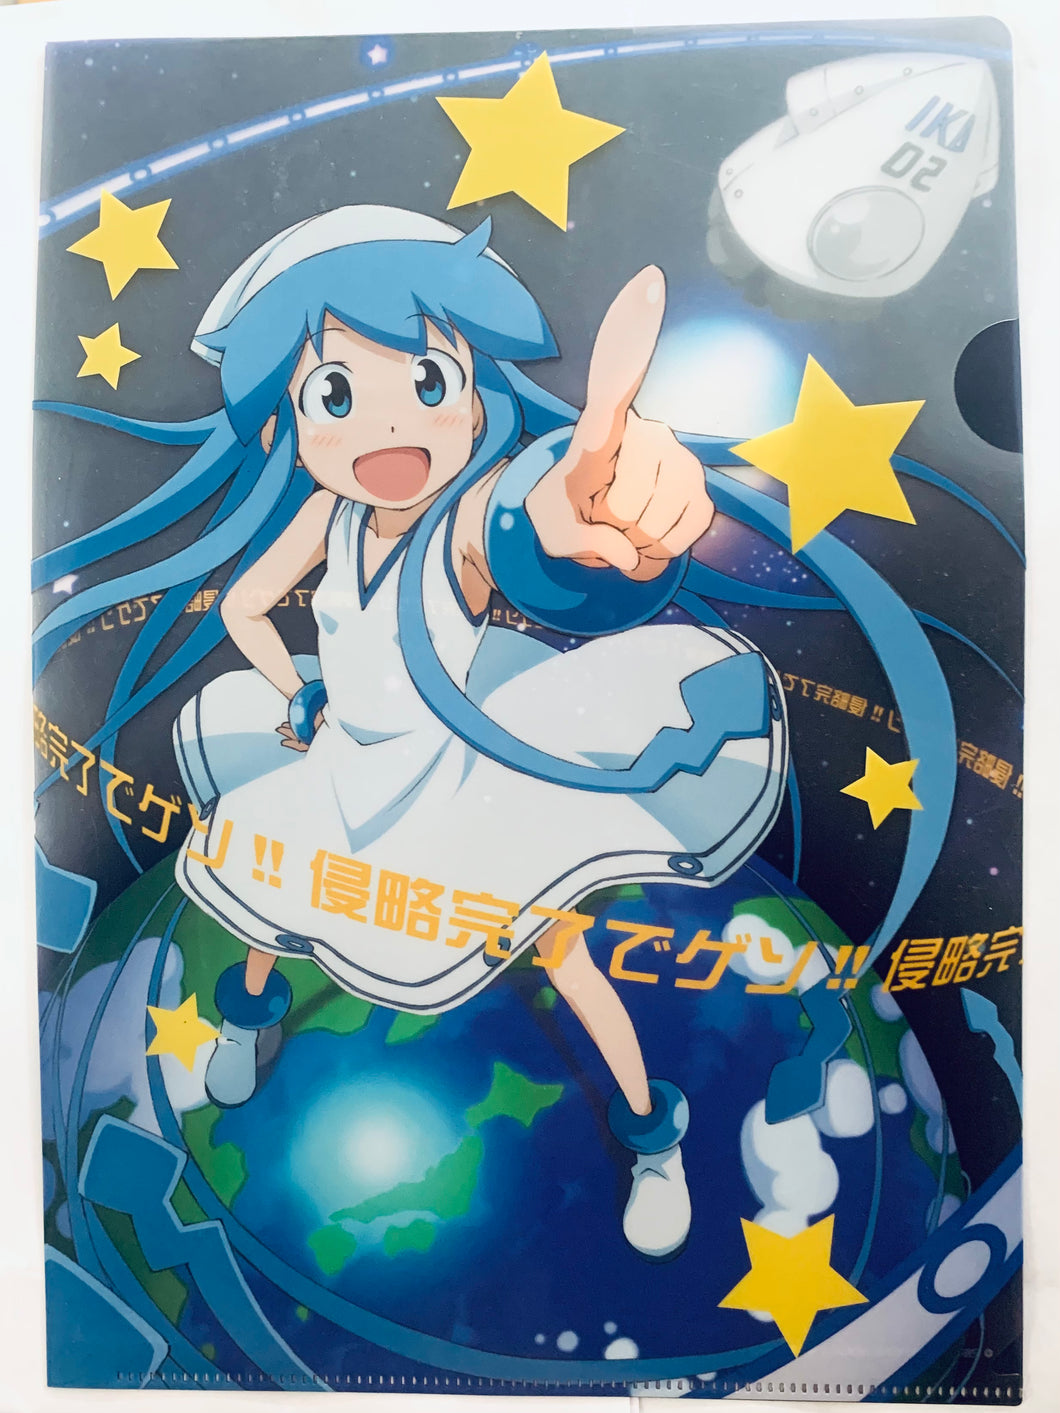 Shinryaku!? Ika Musume - Squid Girl - A4 Clear File - Invasion Completed! ver.